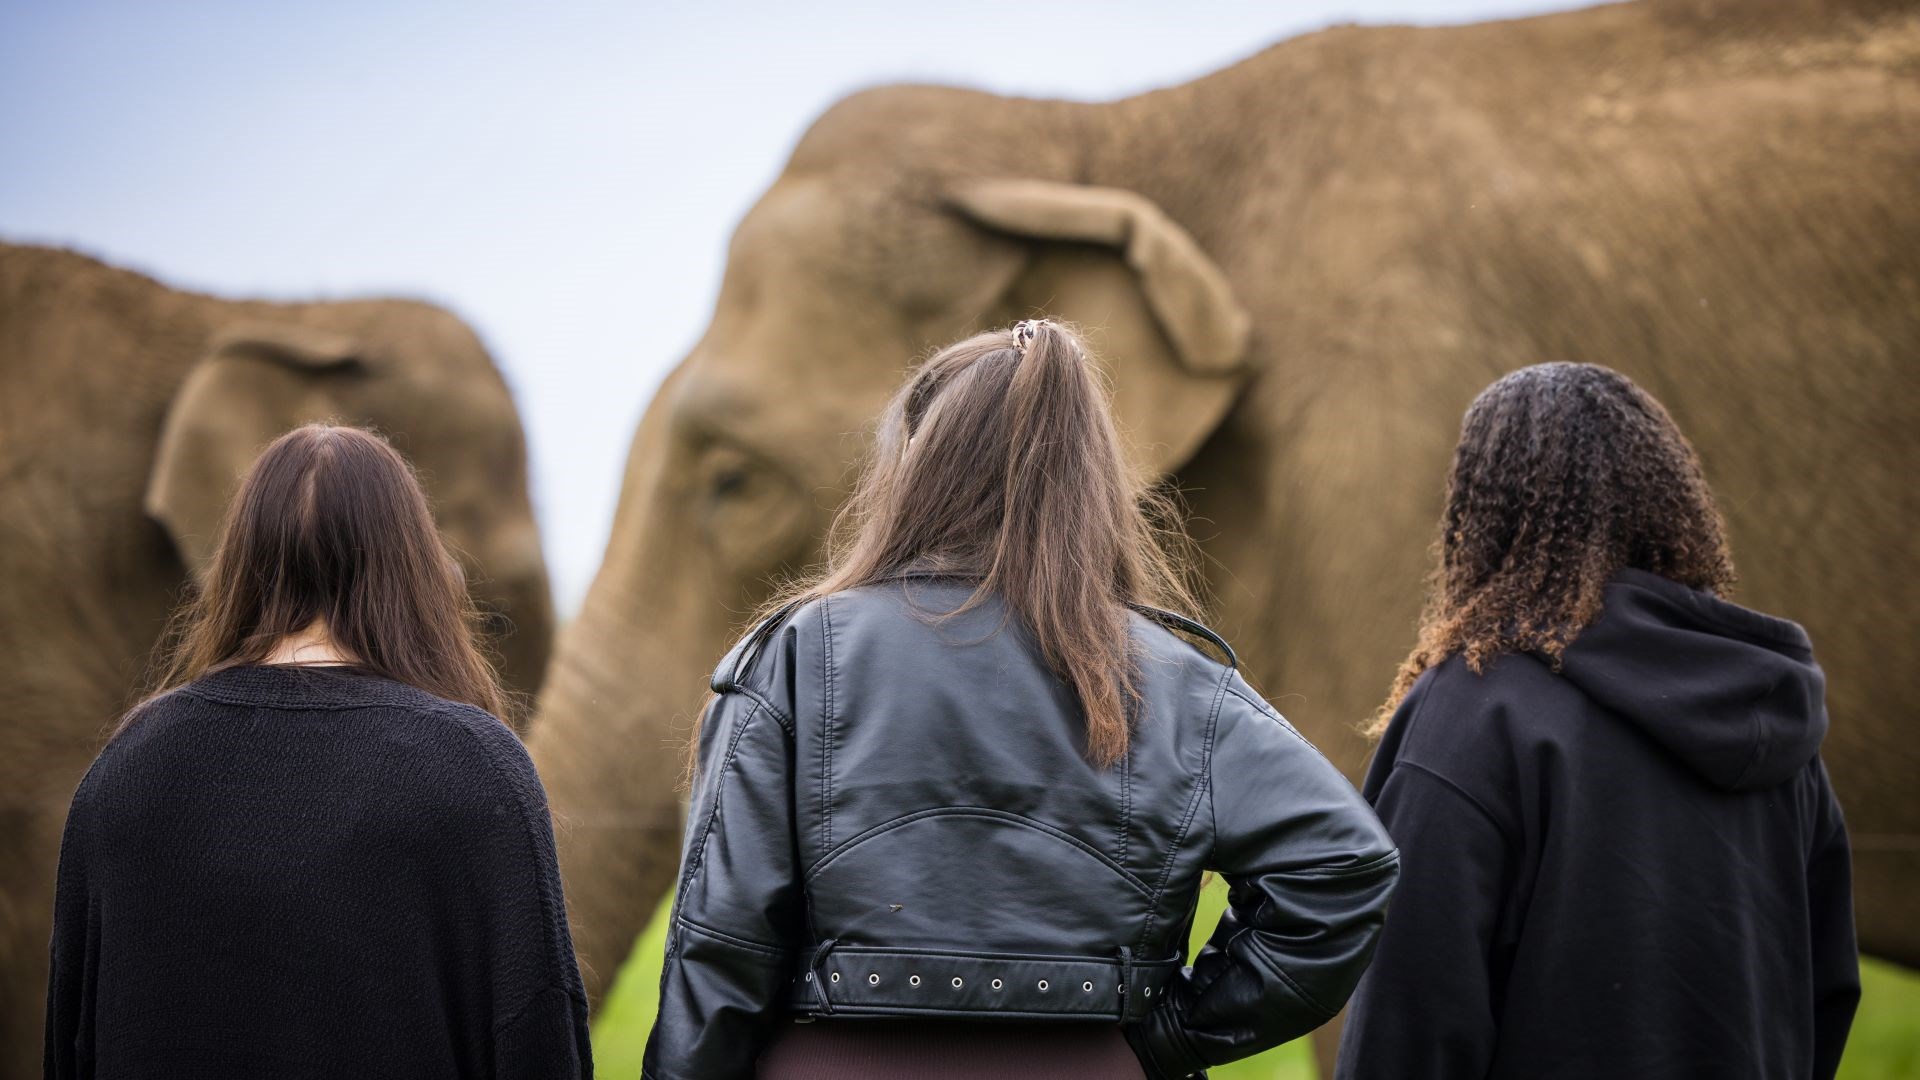 Three women stand and watch two asian elephants as they graze peacefully on some grass in the background